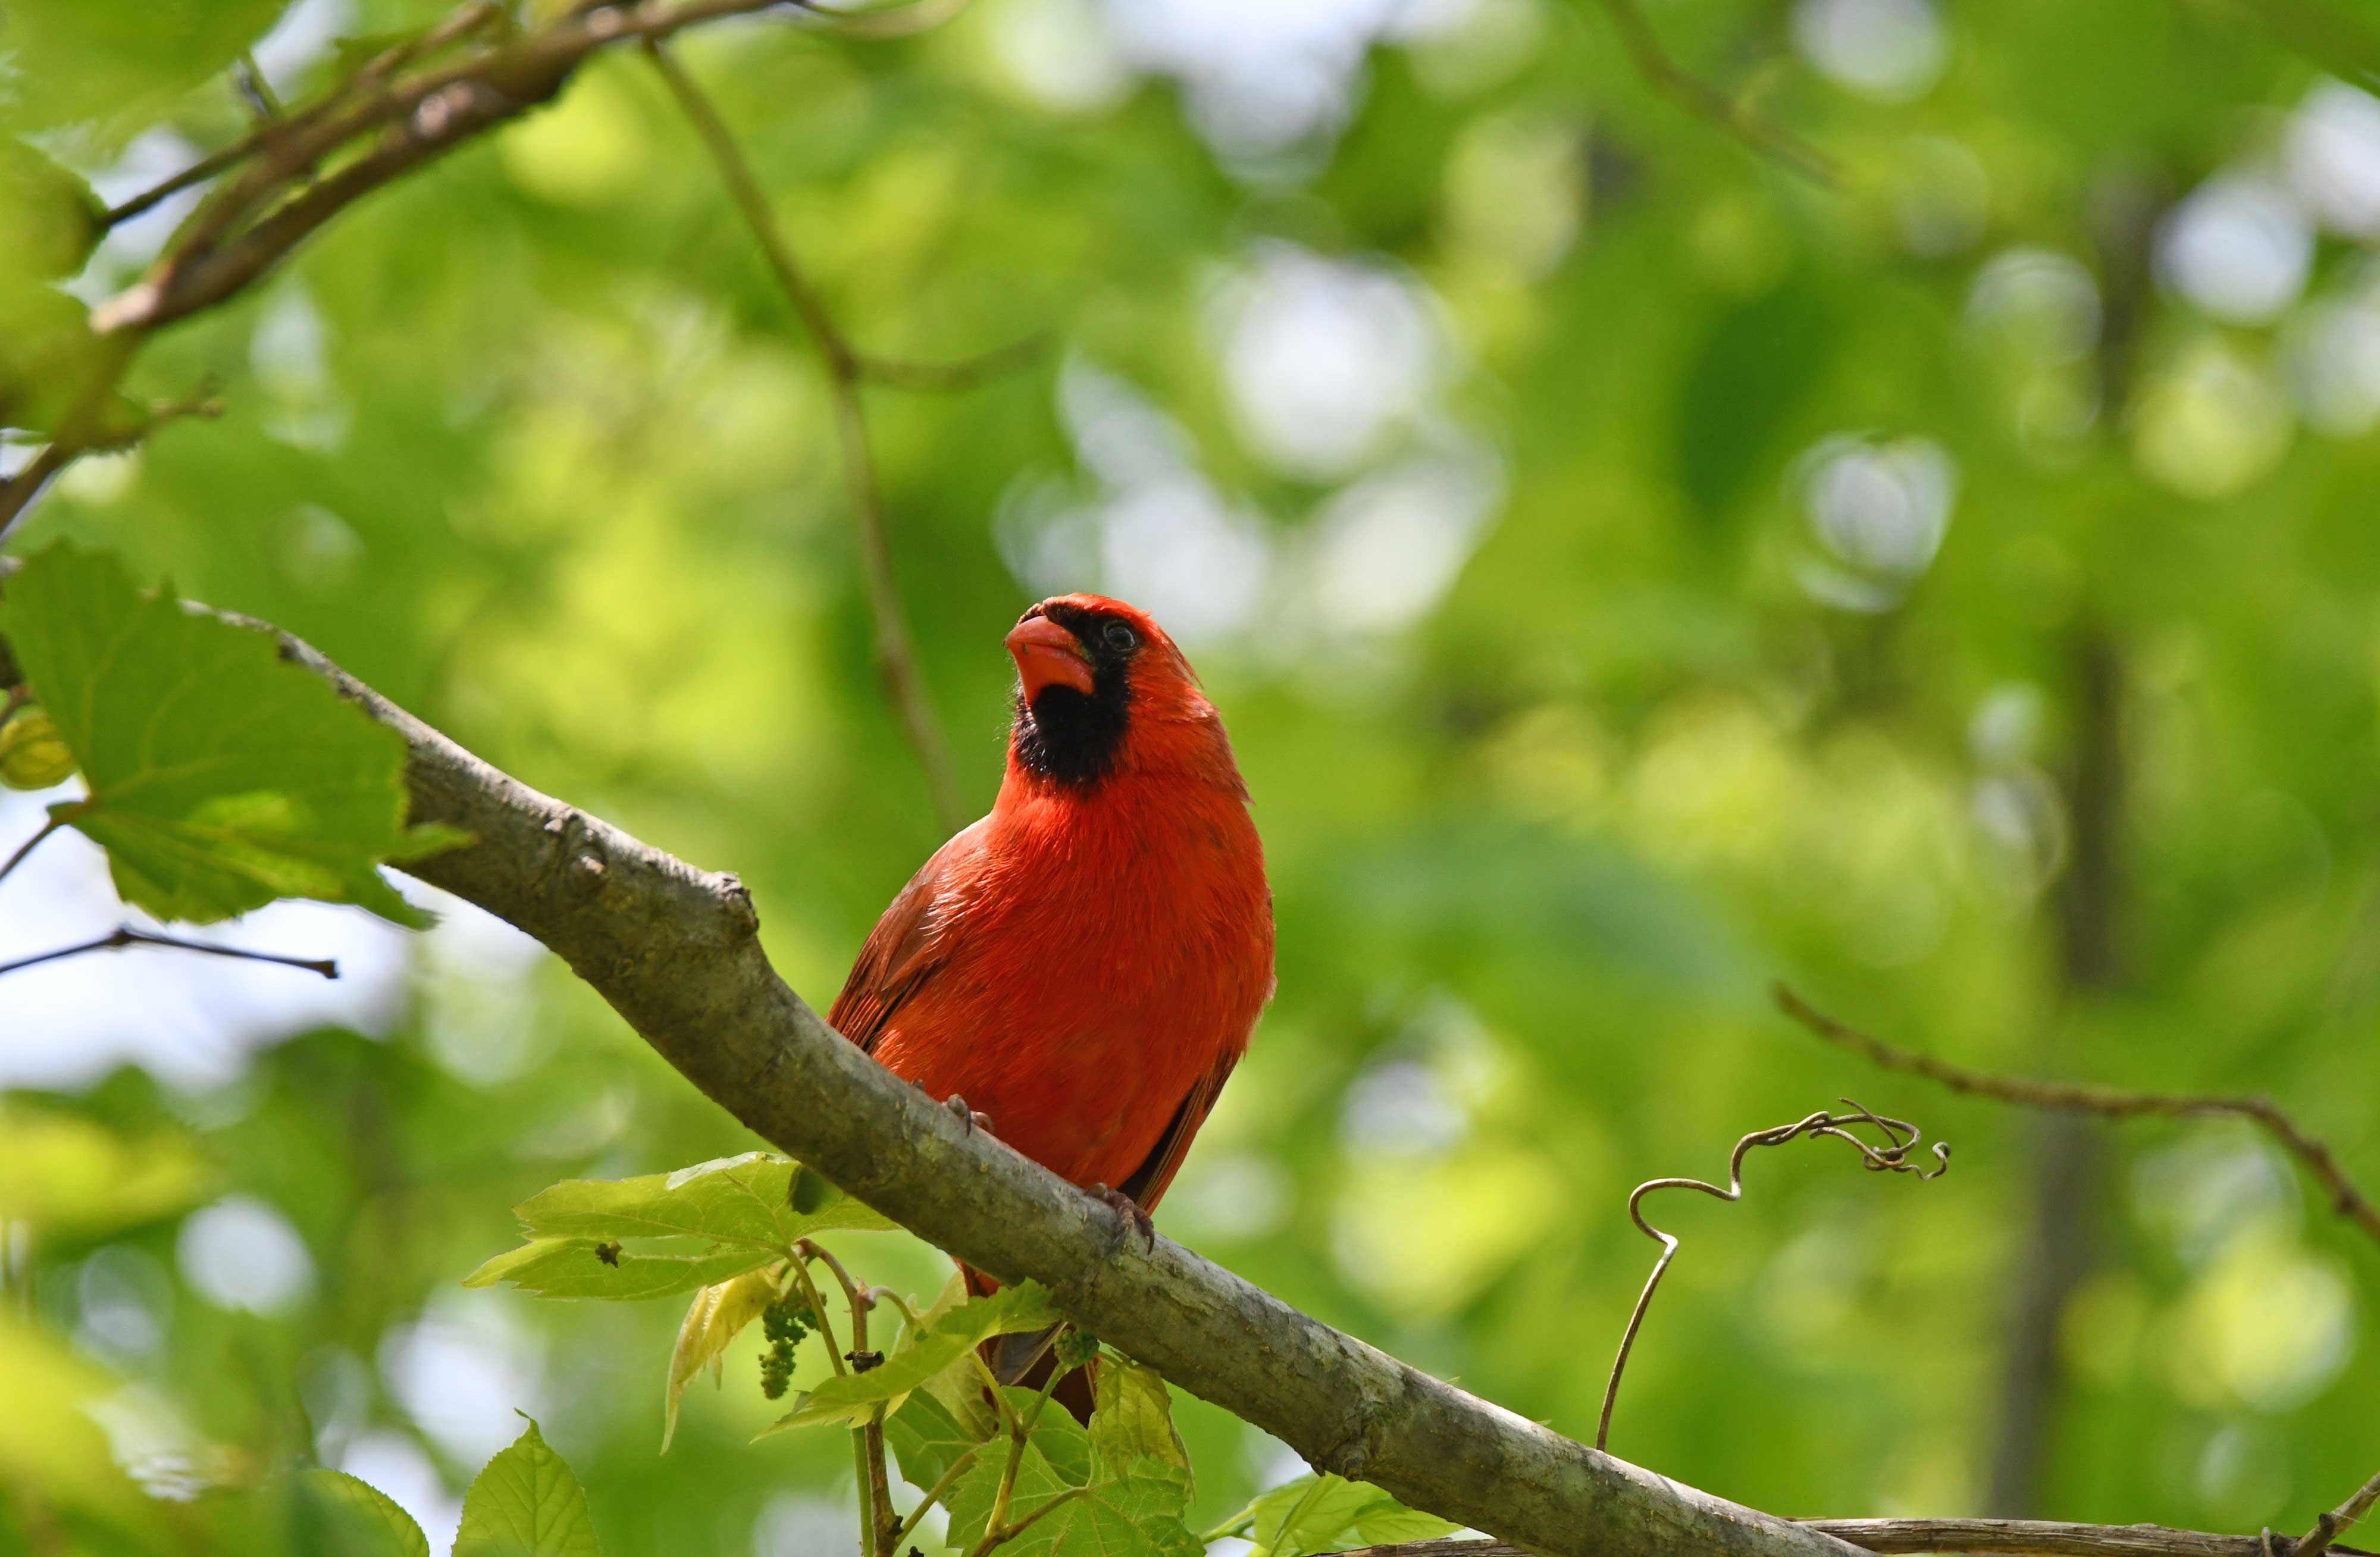 A male northern cardinal on a branch.